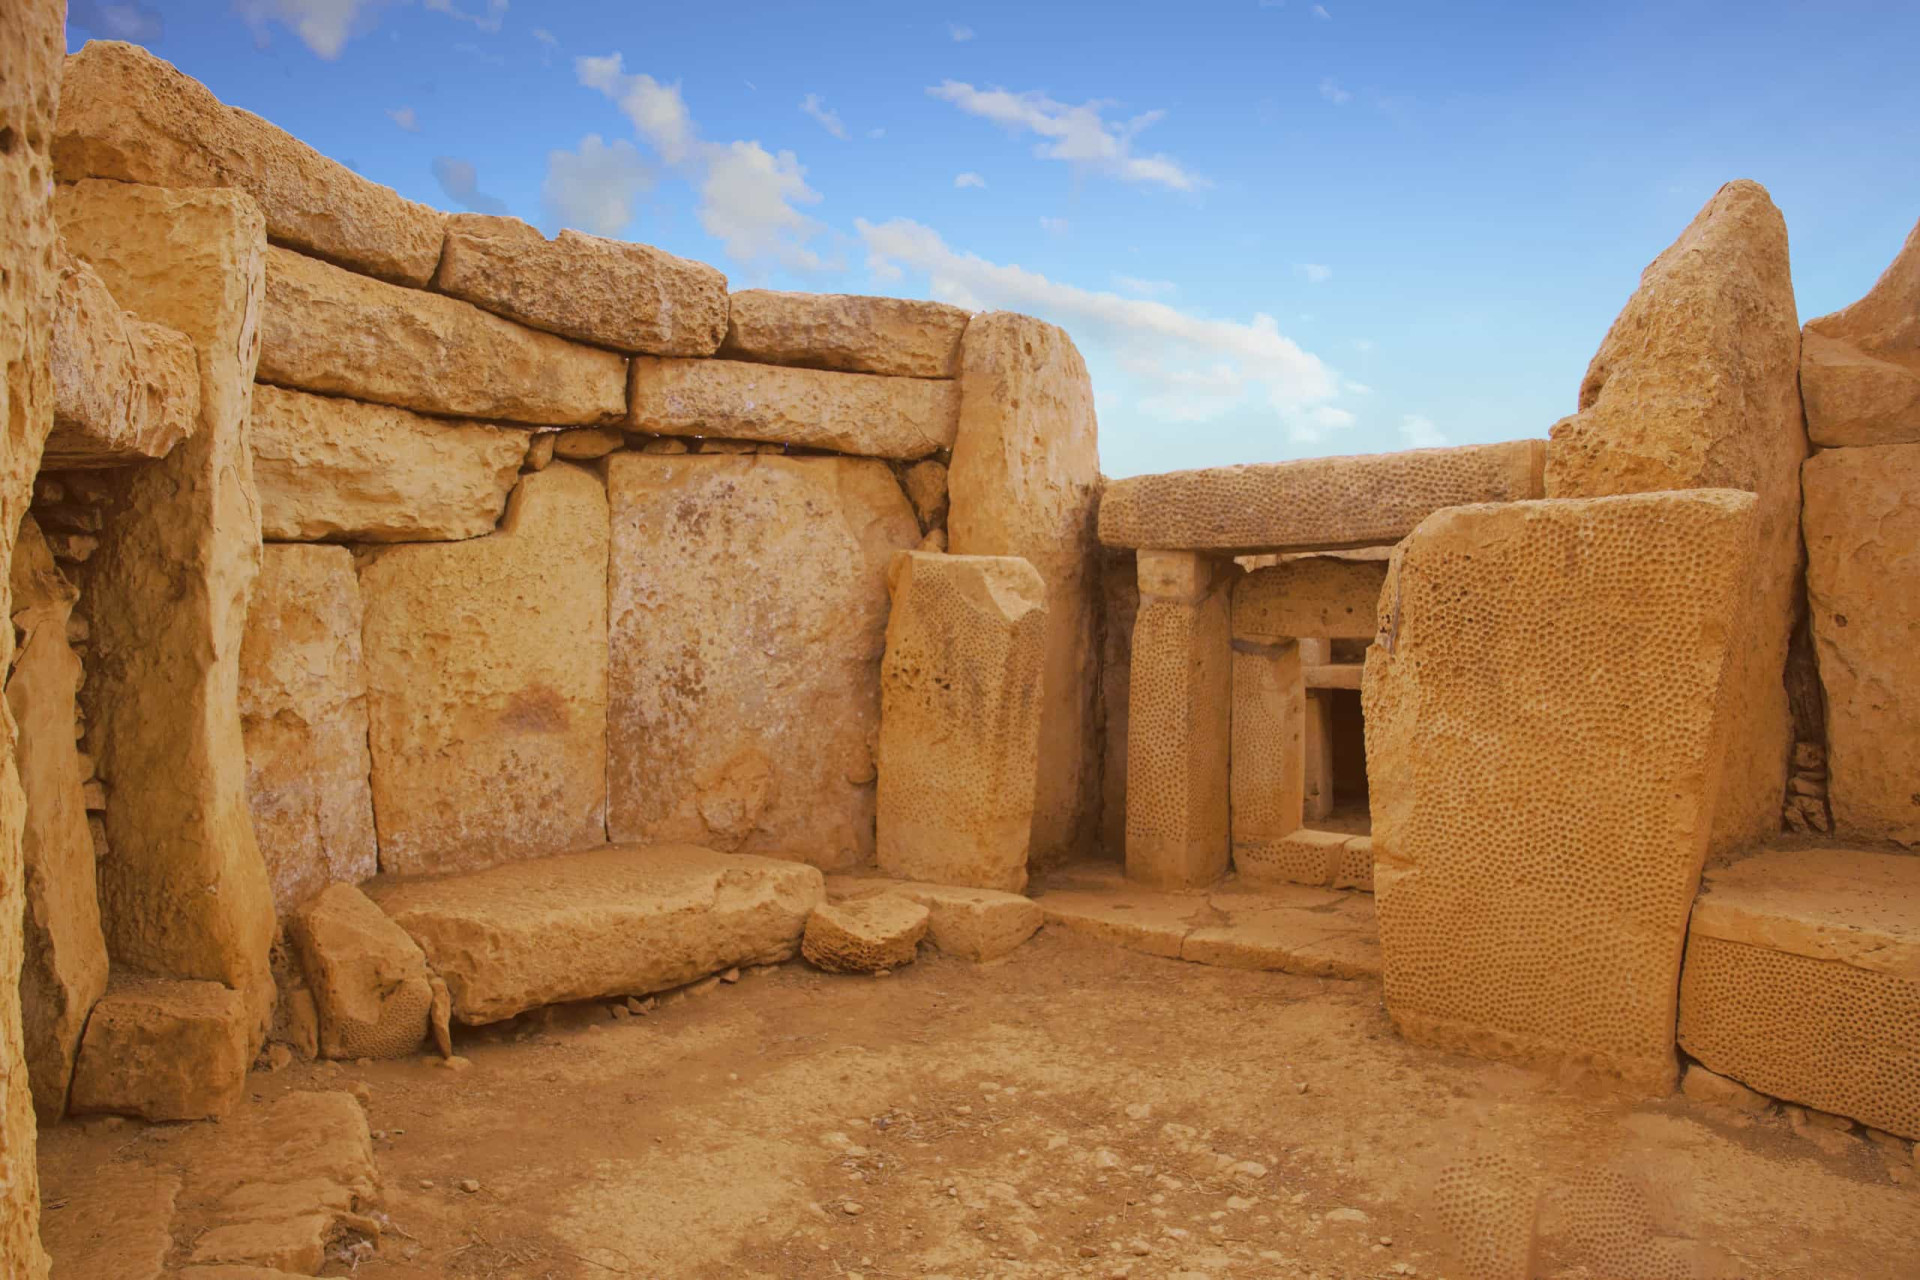 The famed Knights of Malta played an important role in construction starting in the 11th century, but did you know that Maltese history stretches back at least 6,000 years? The Mnajdra, a megalithic temple complex on the southern coast, was built around the fourth millennium BCE.<p><a href="https://www.msn.com/en-us/community/channel/vid-7xx8mnucu55yw63we9va2gwr7uihbxwc68fxqp25x6tg4ftibpra?cvid=94631541bc0f4f89bfd59158d696ad7e">Follow us and access great exclusive content every day</a></p>